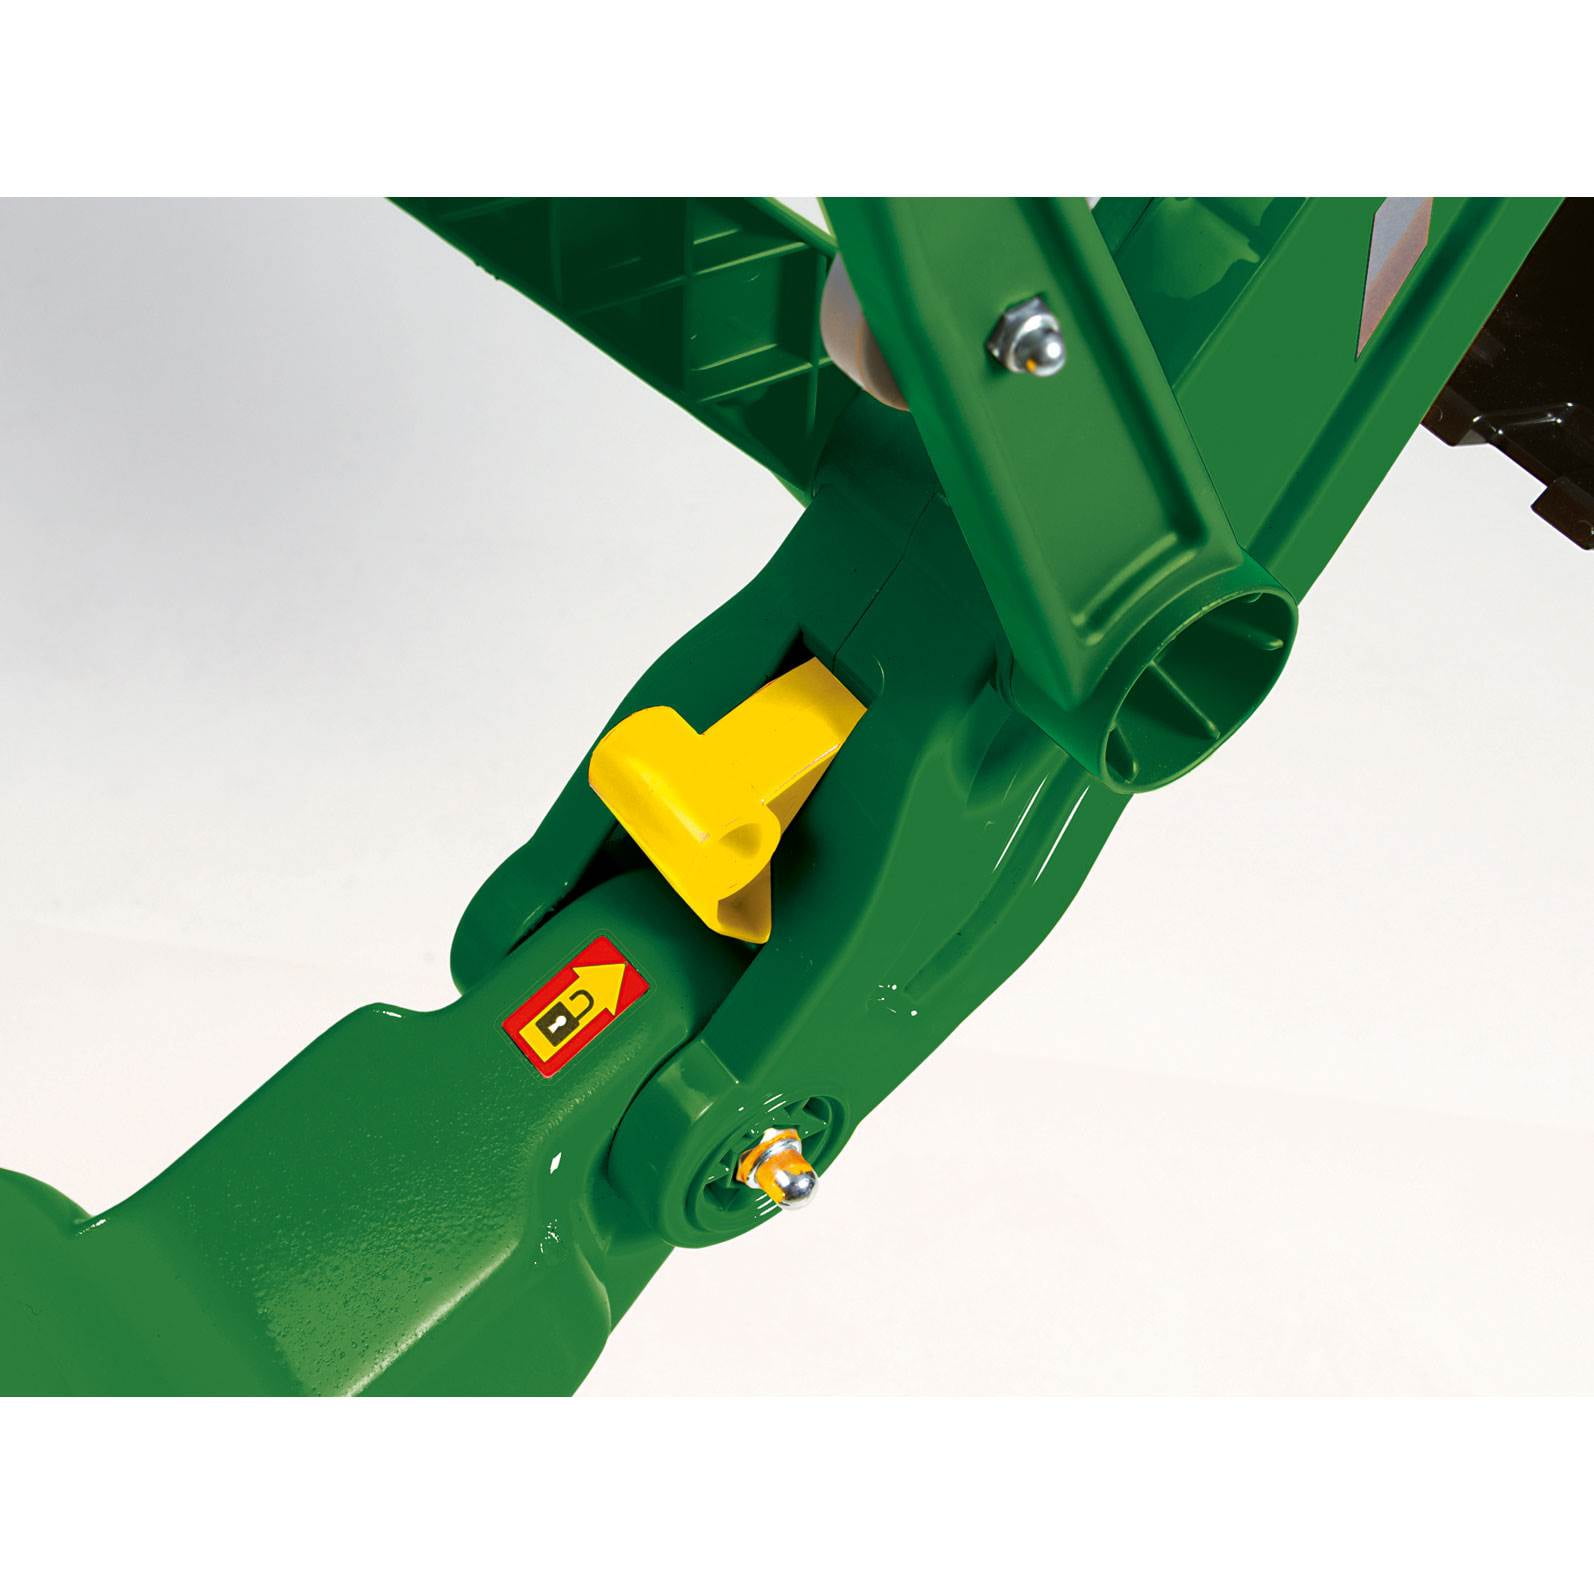 Rolly Toys John Deere Digger for Parts for sale online 